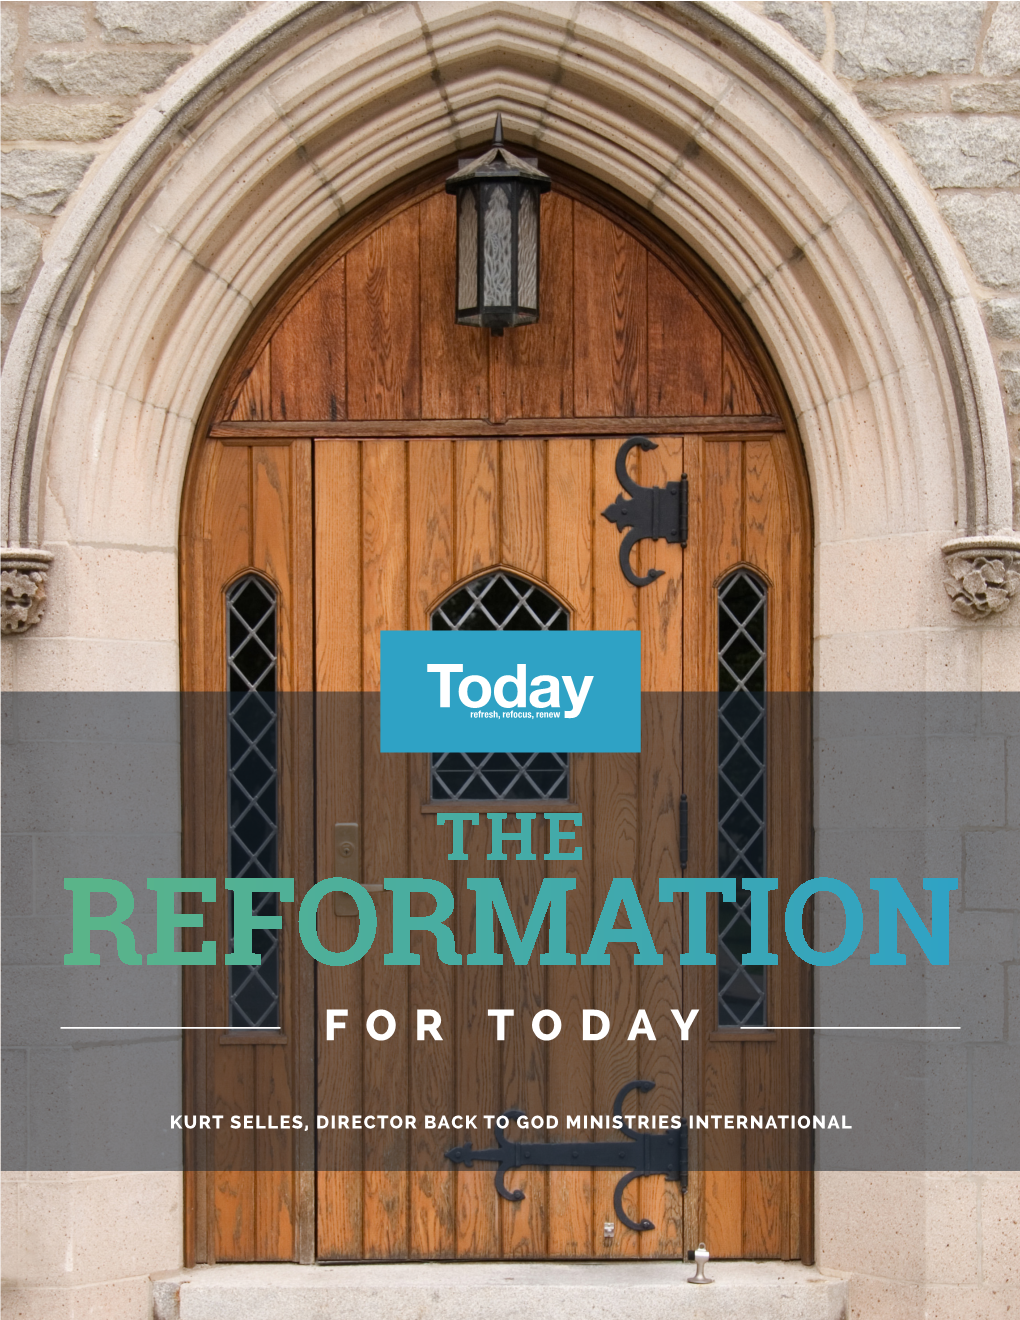 The Reformation for Today